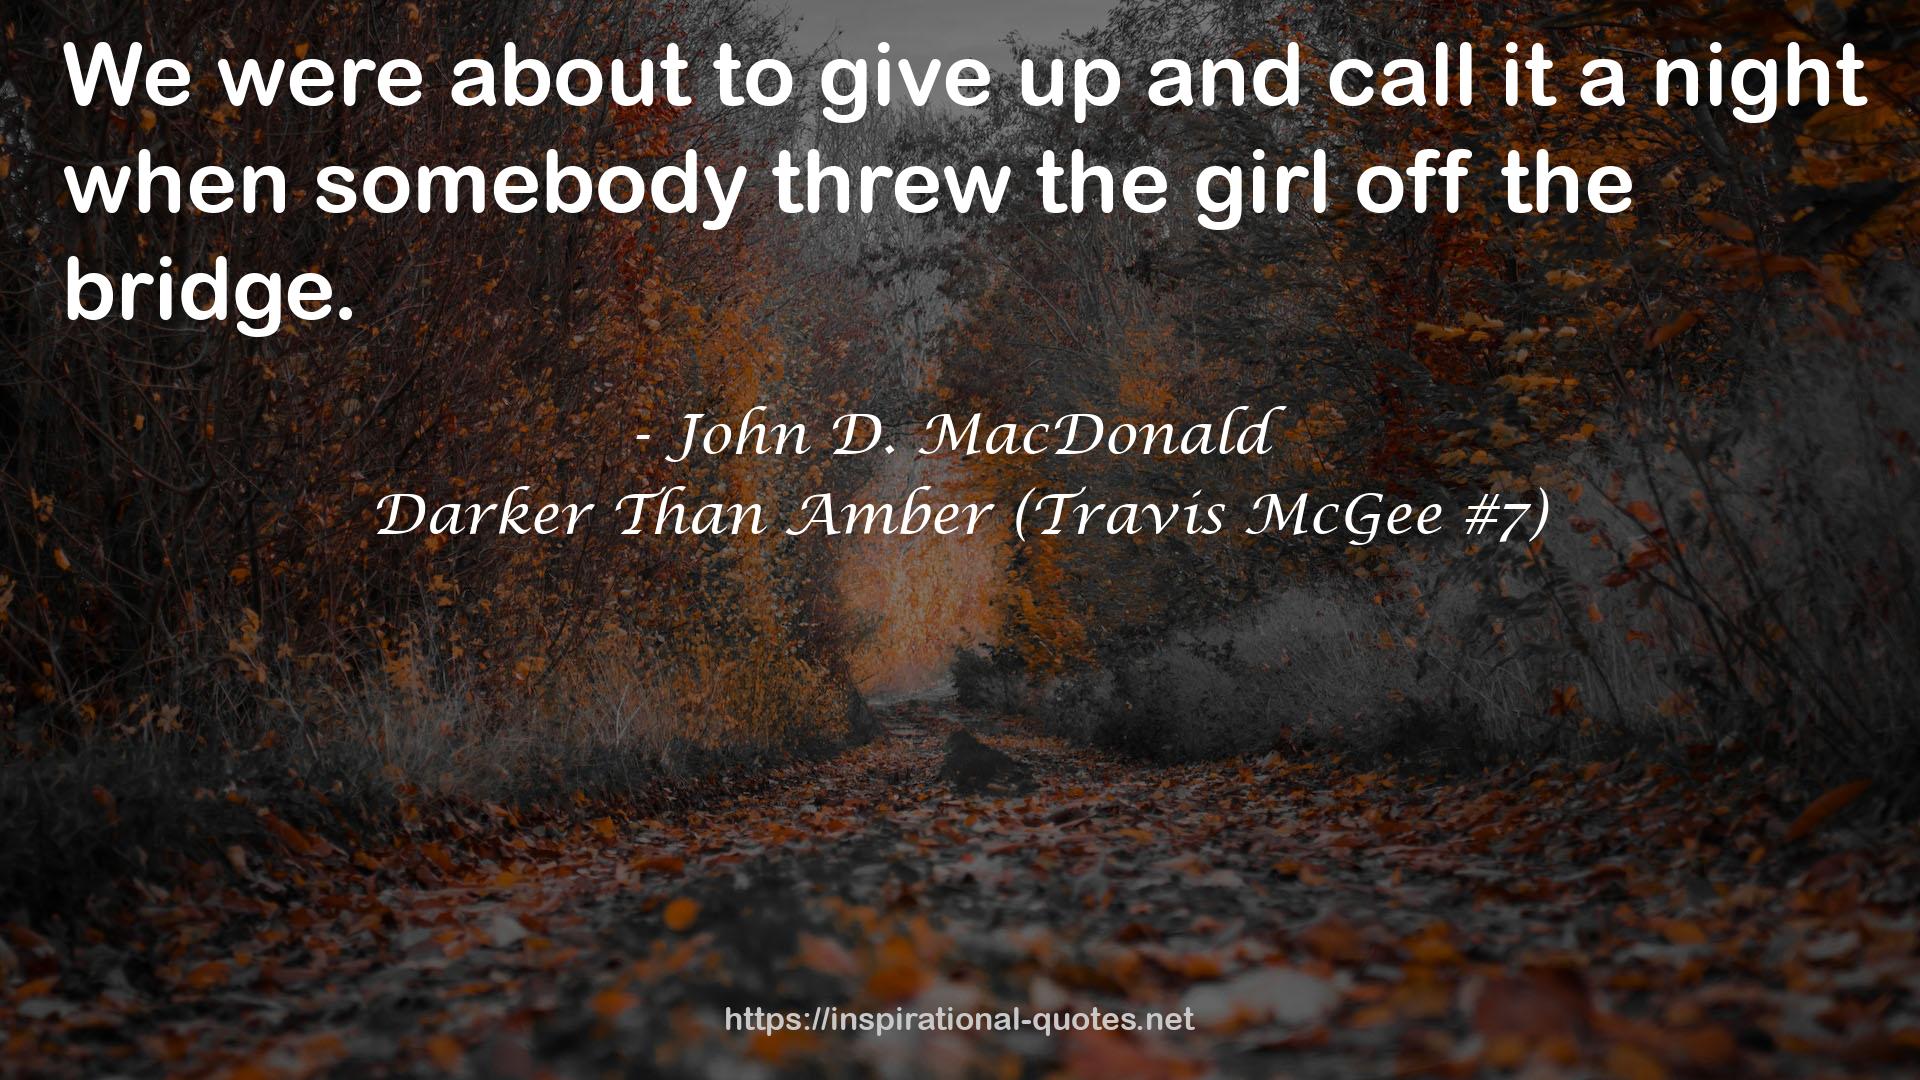 Darker Than Amber (Travis McGee #7) QUOTES